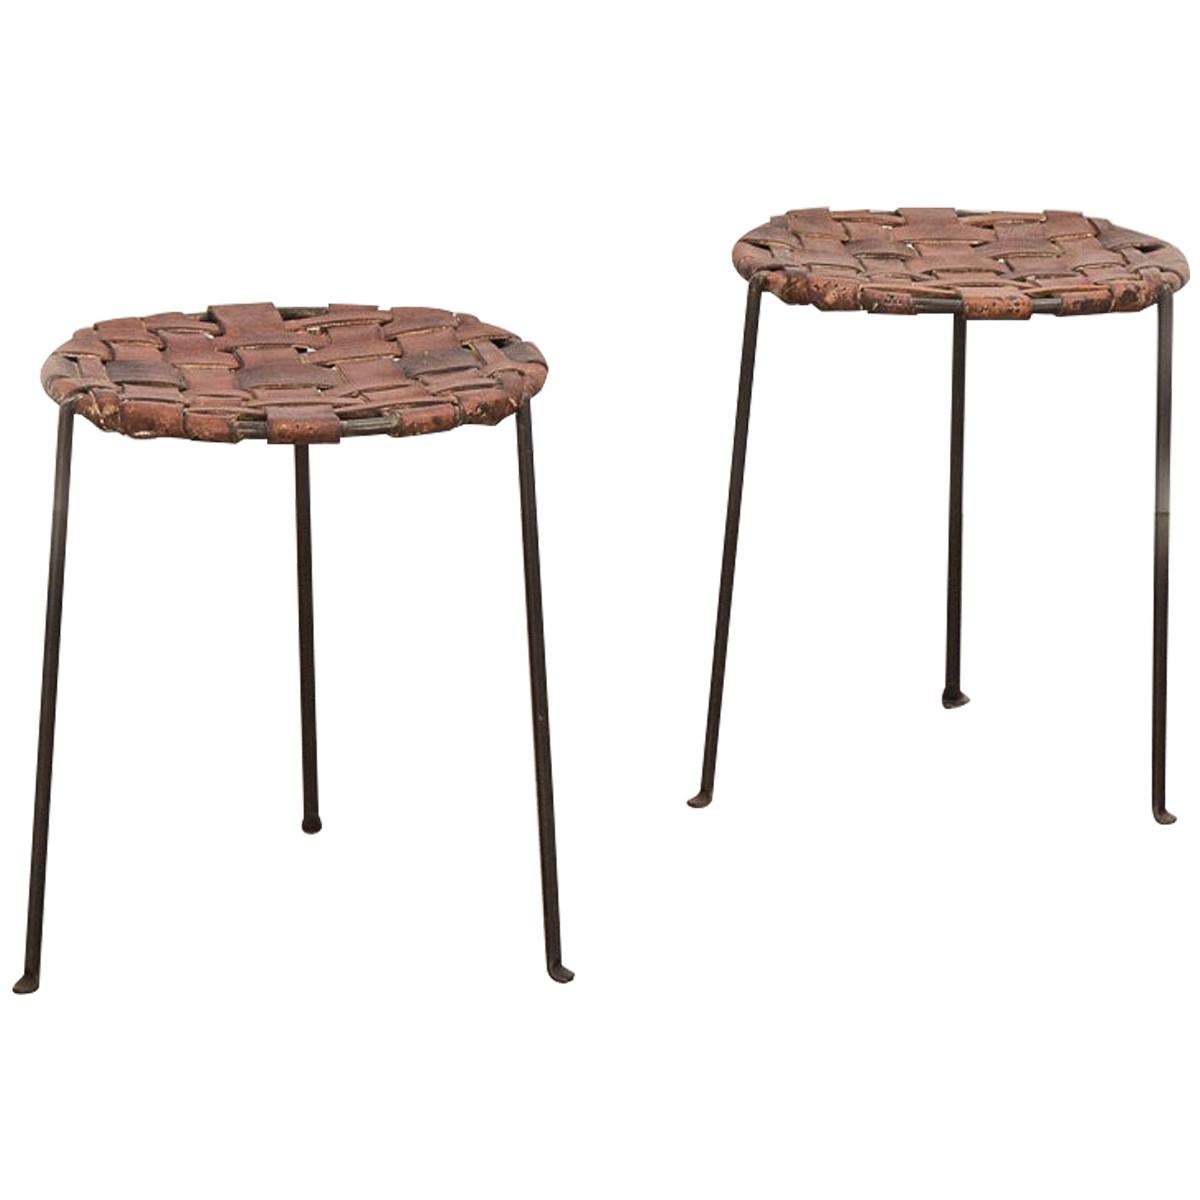 Swift and Monell Woven Leather Iron Stools